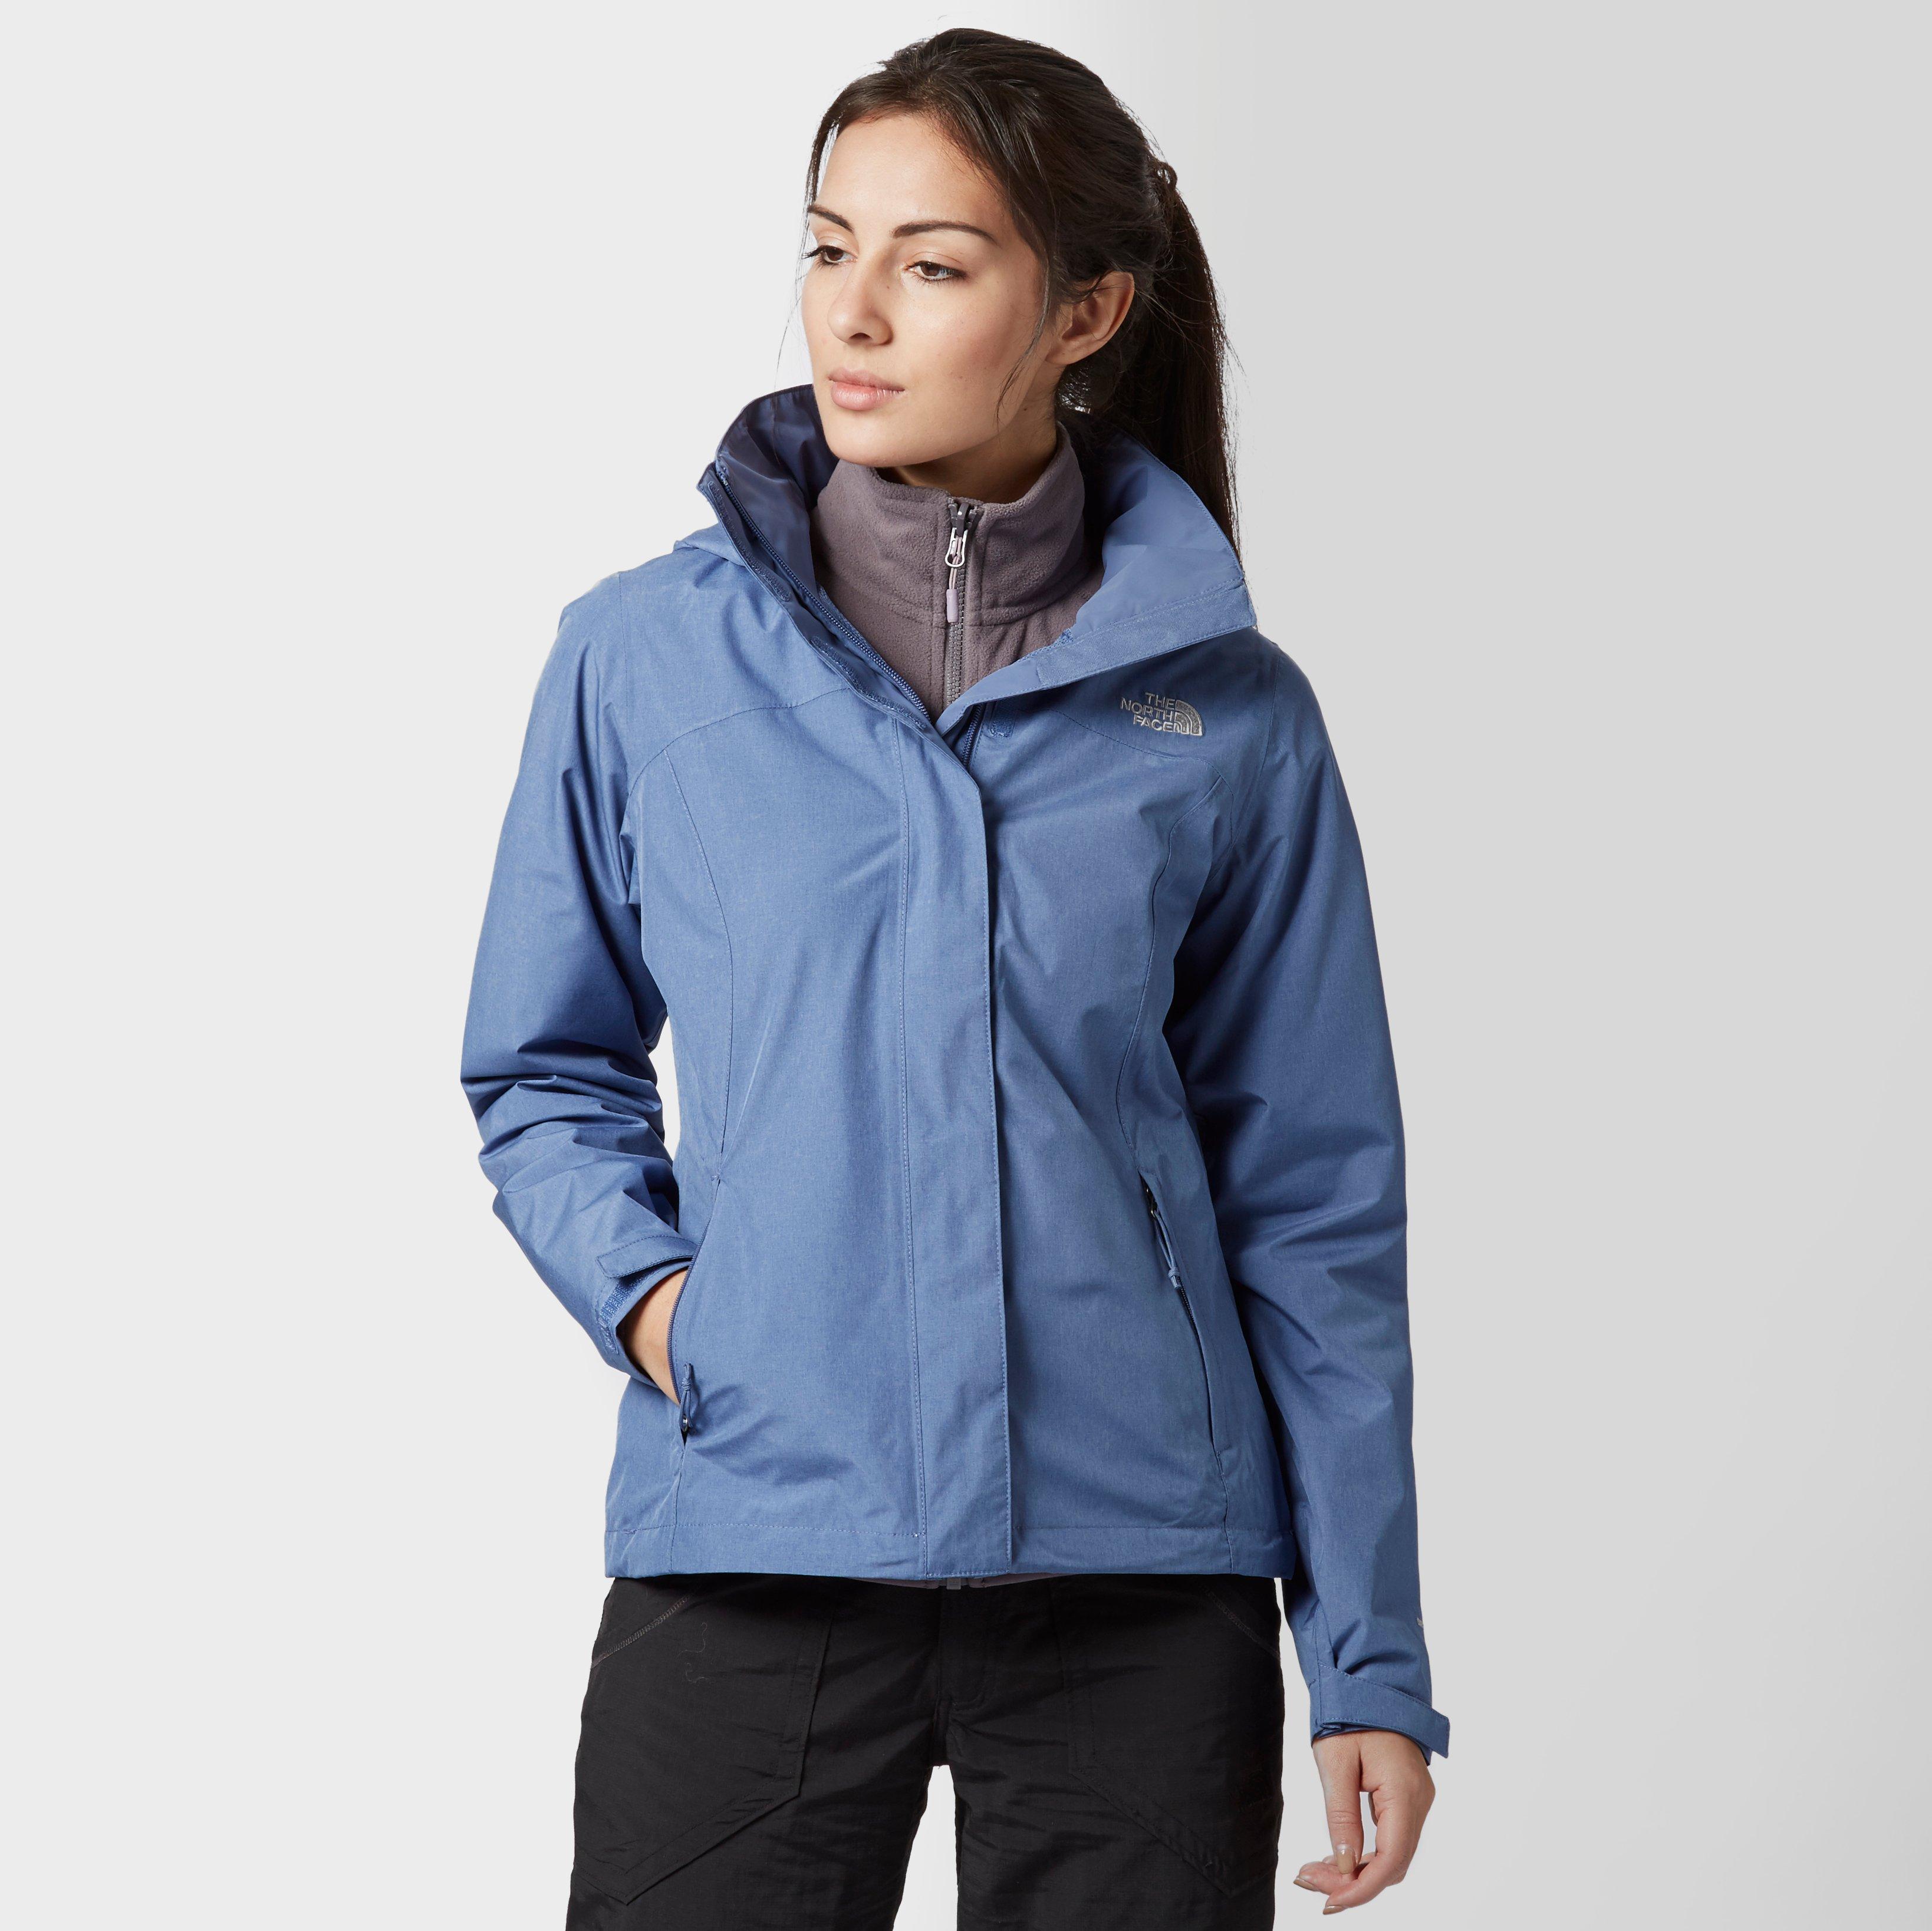 Berghaus Calisto Delta 3 in 1 Jacket – Women’s | Jacket Compare ...